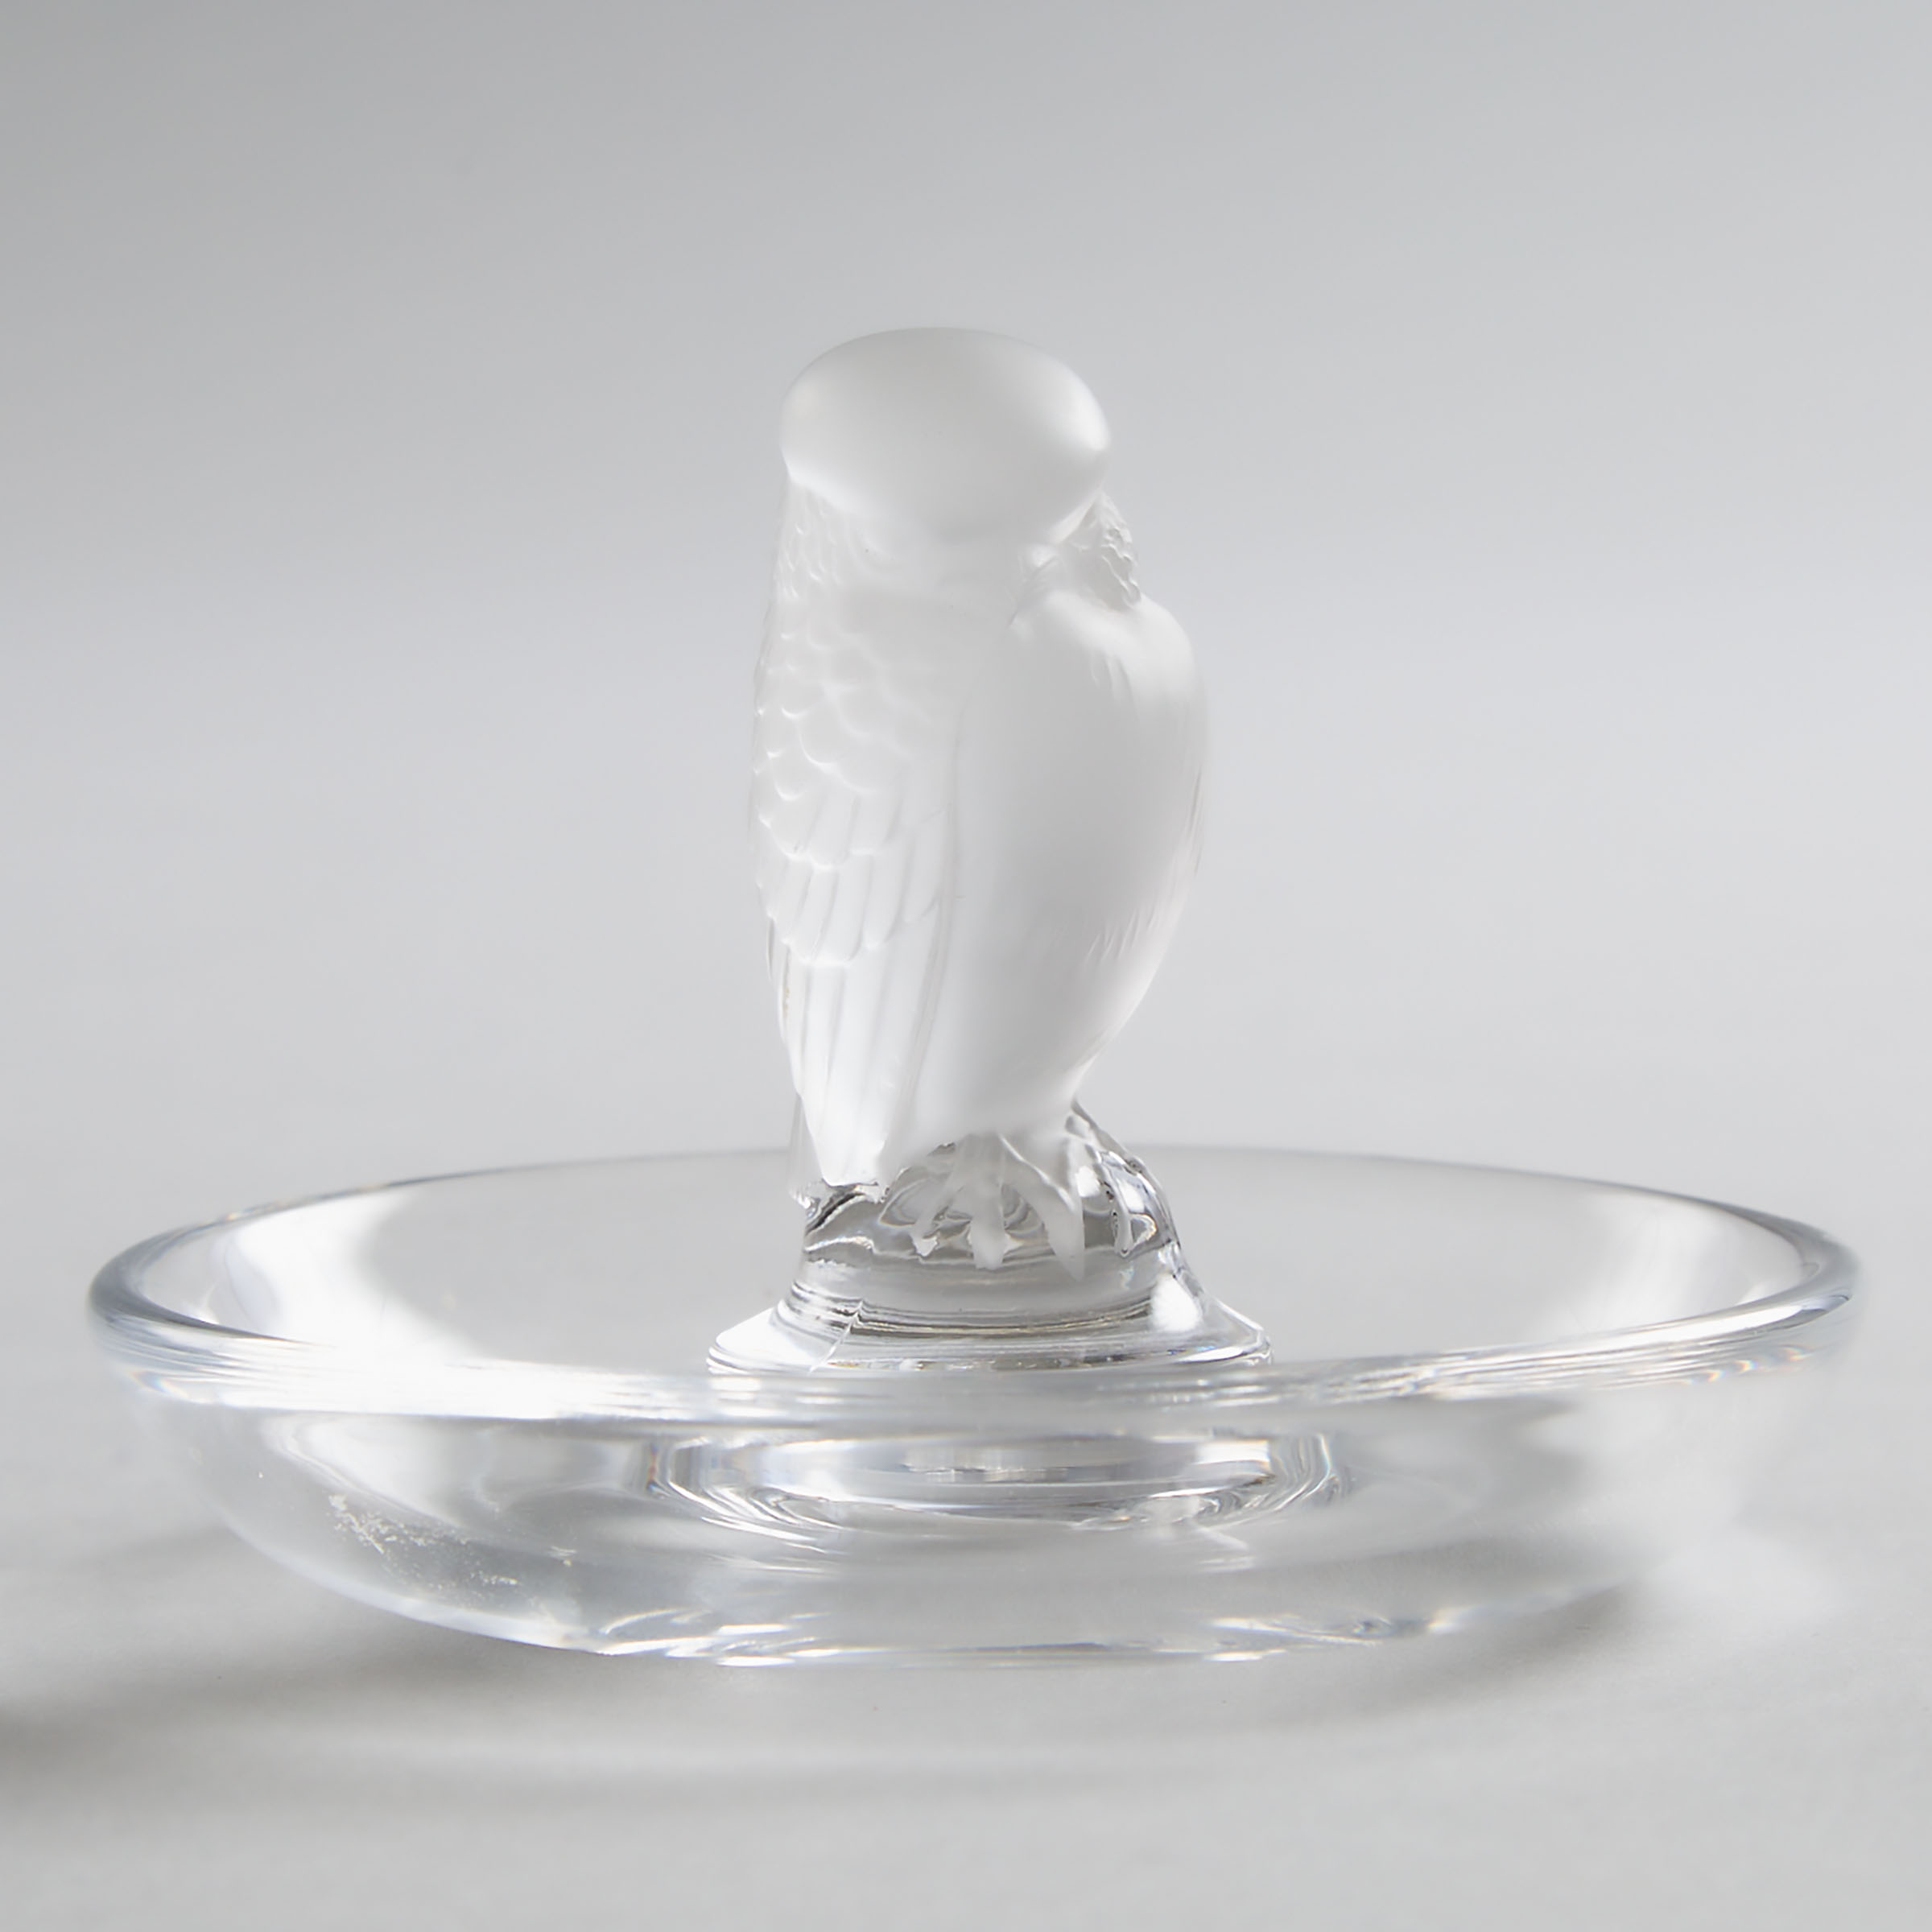 'Rapace', Lalique Moulded and Frosted Glass Cendrier, post-1945